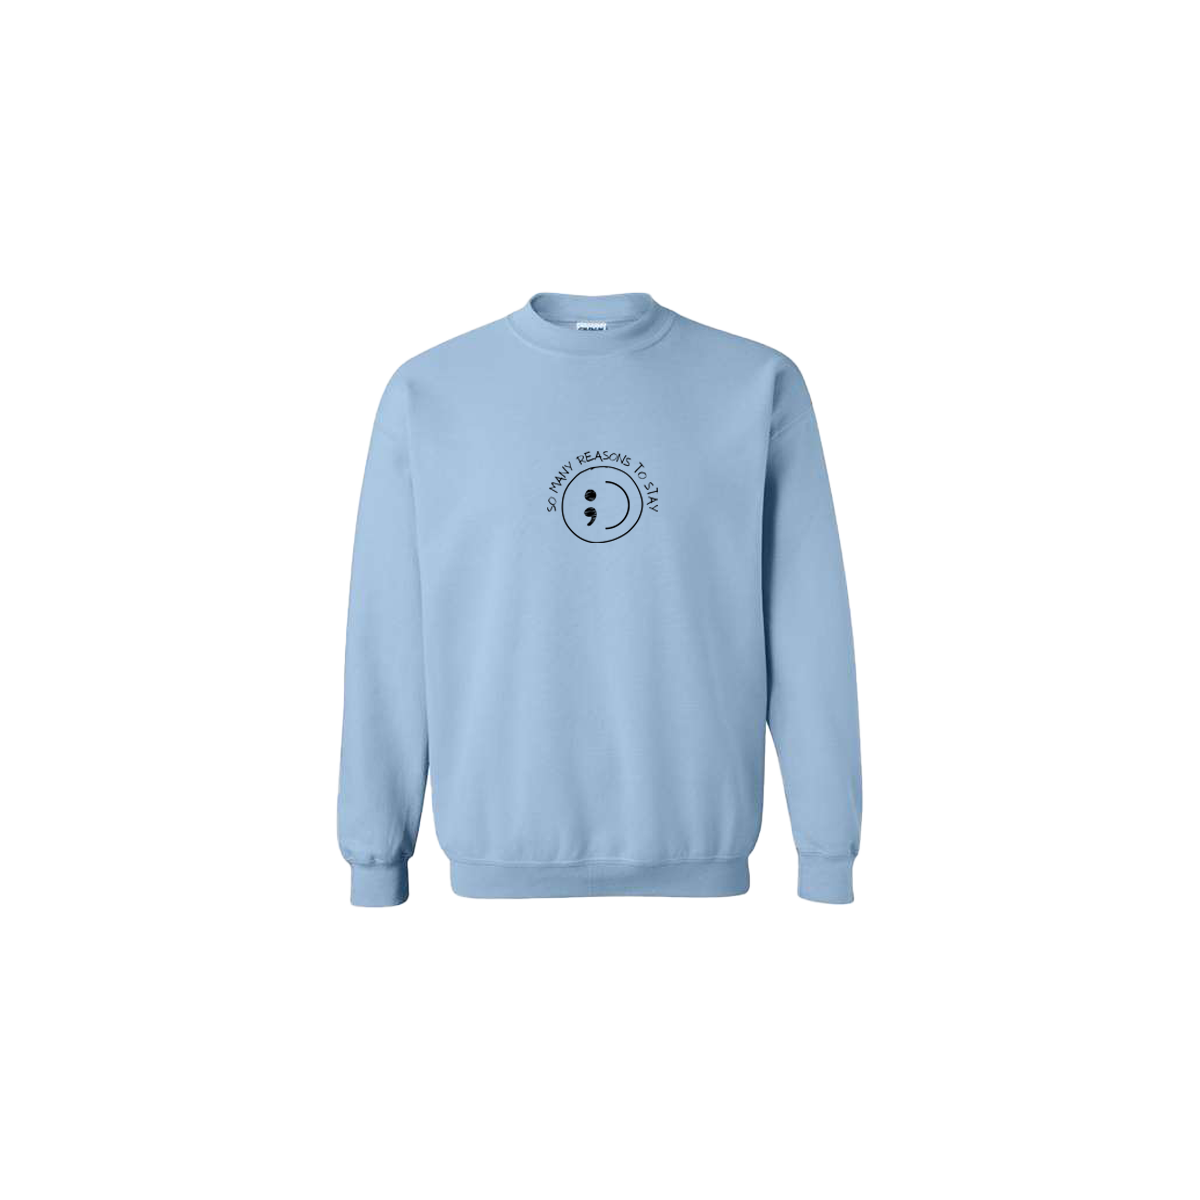 So Many Reasons to Stay Embroidered Light Blue Crewneck - Mental Health Awareness Clothing